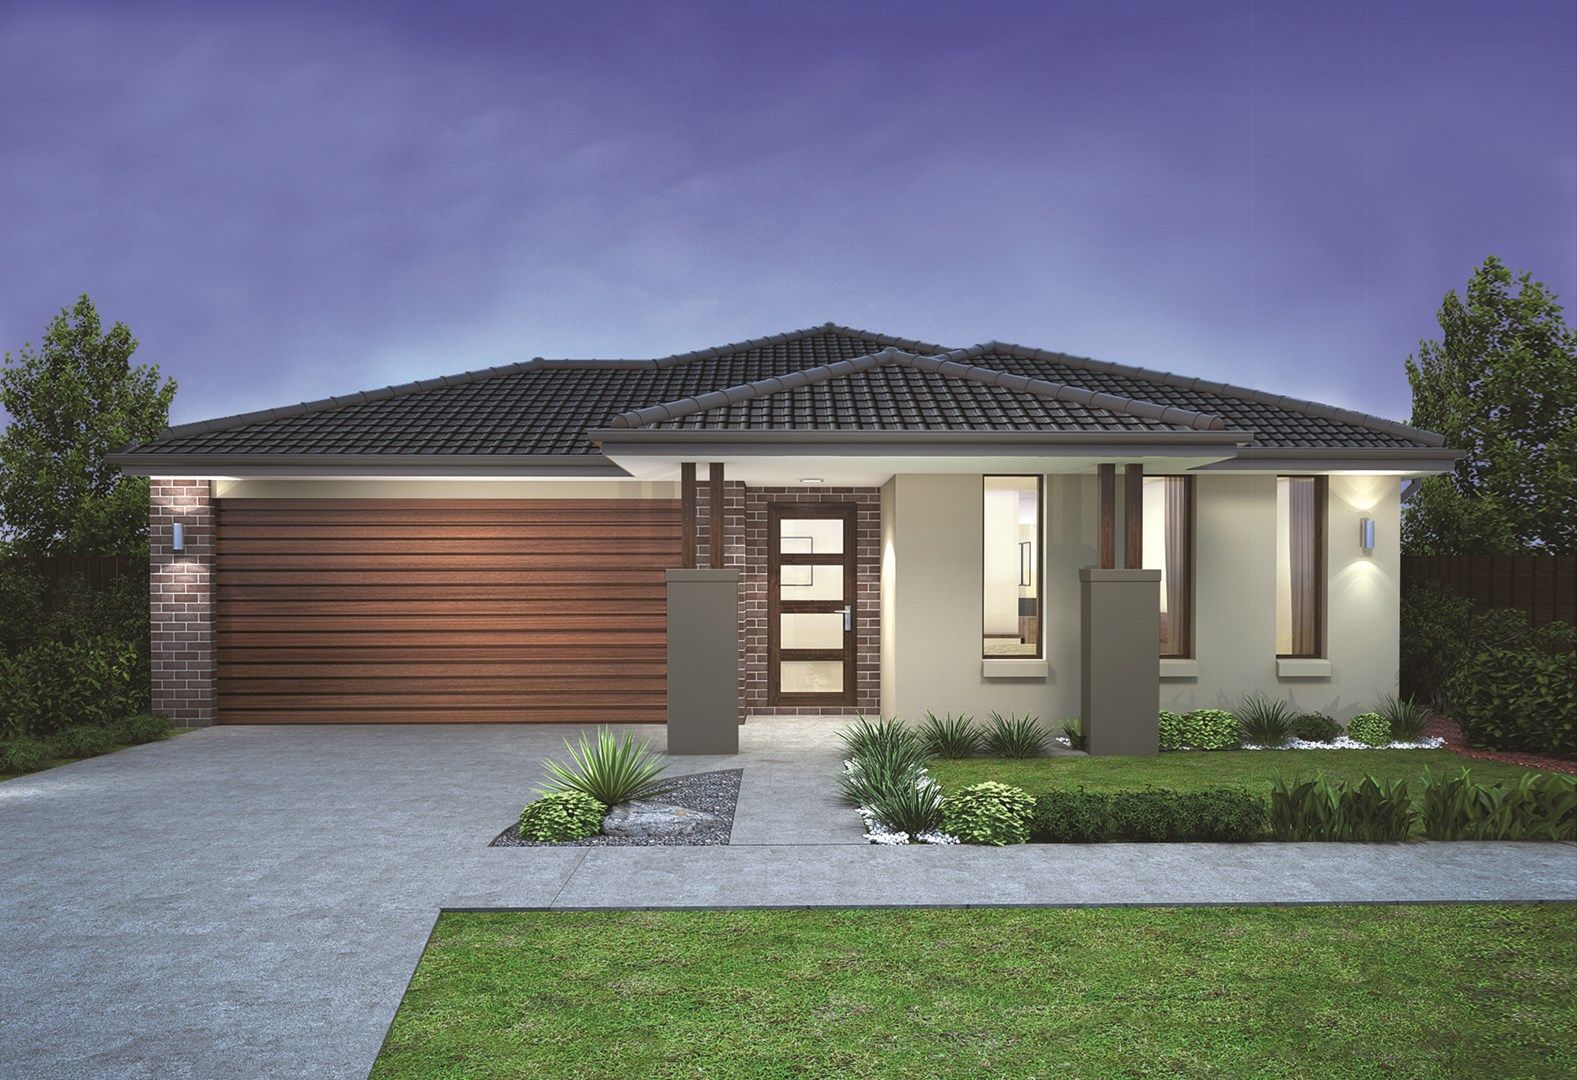 4 bedrooms New House & Land in Lot 509 Rosewood DEANSIDE VIC, 3336